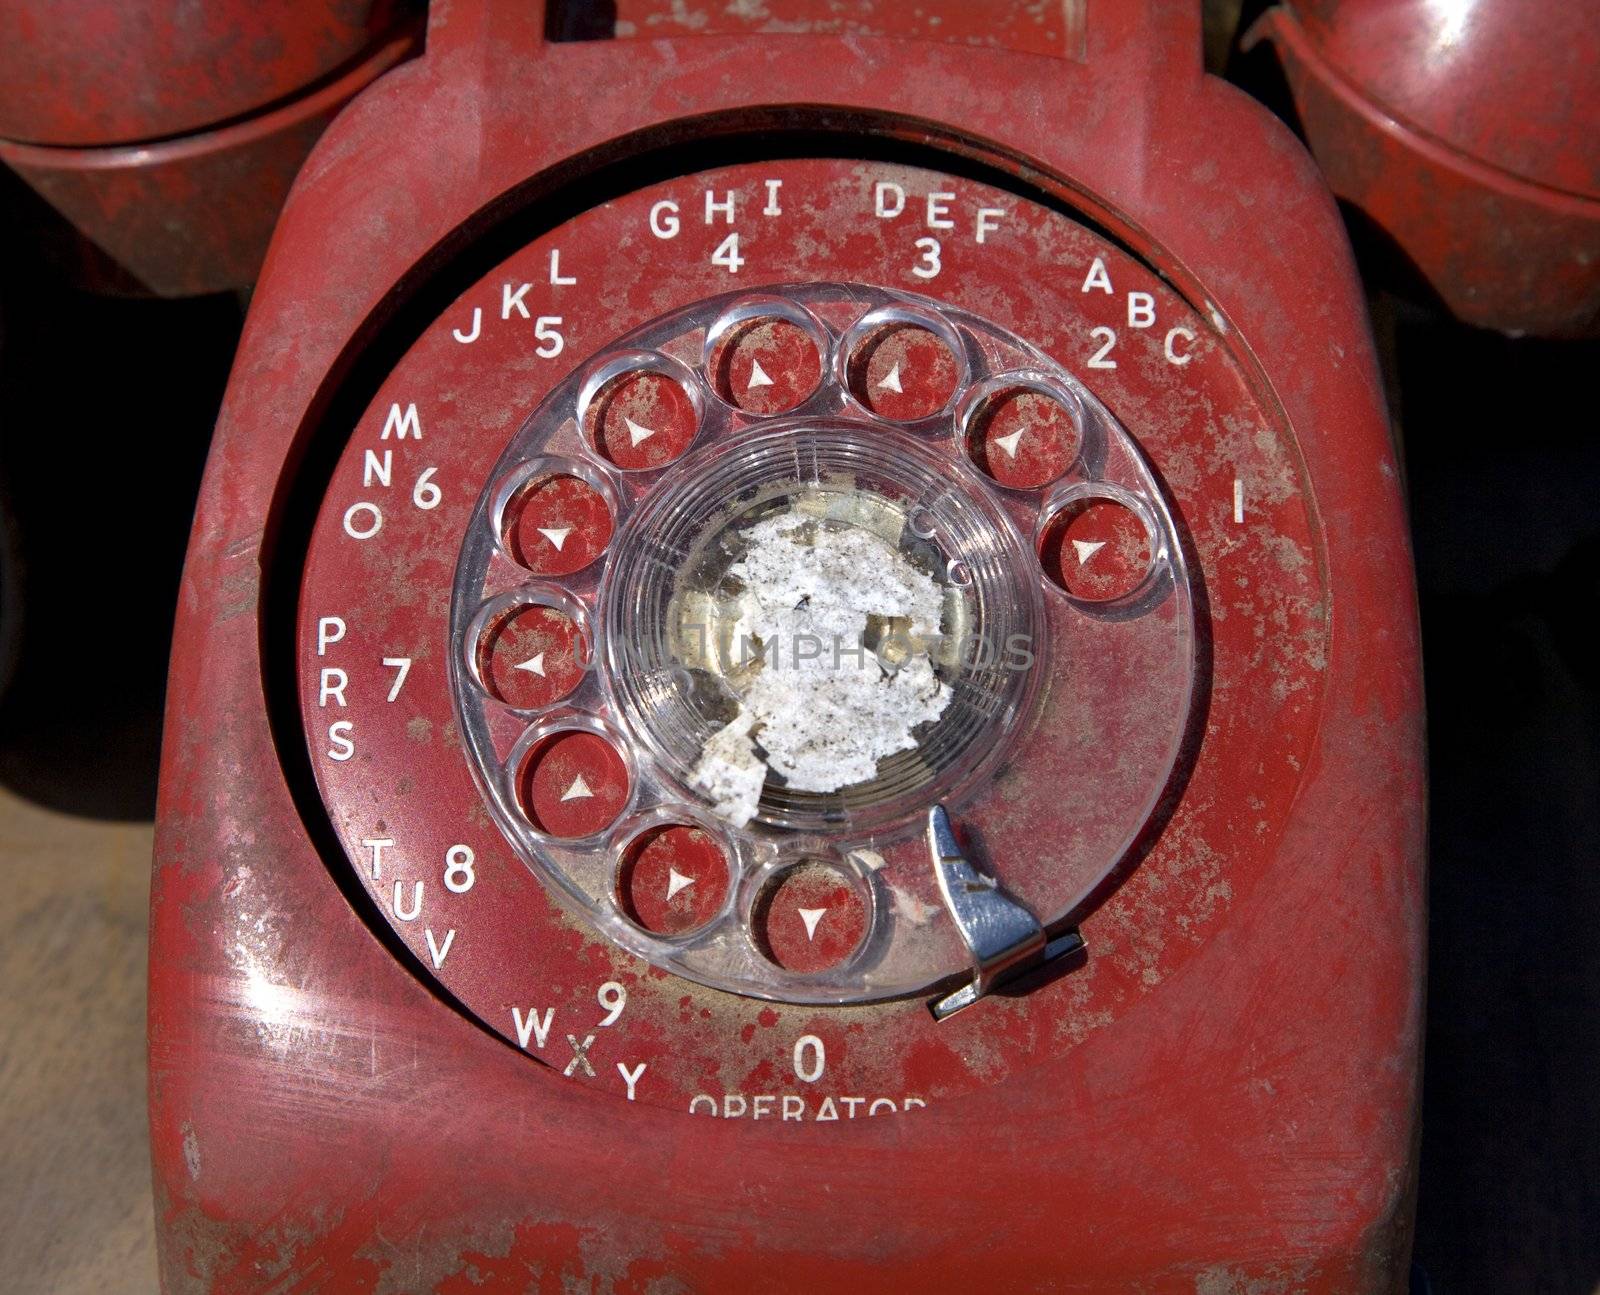 Close up of old-fashioned rotary telephone.